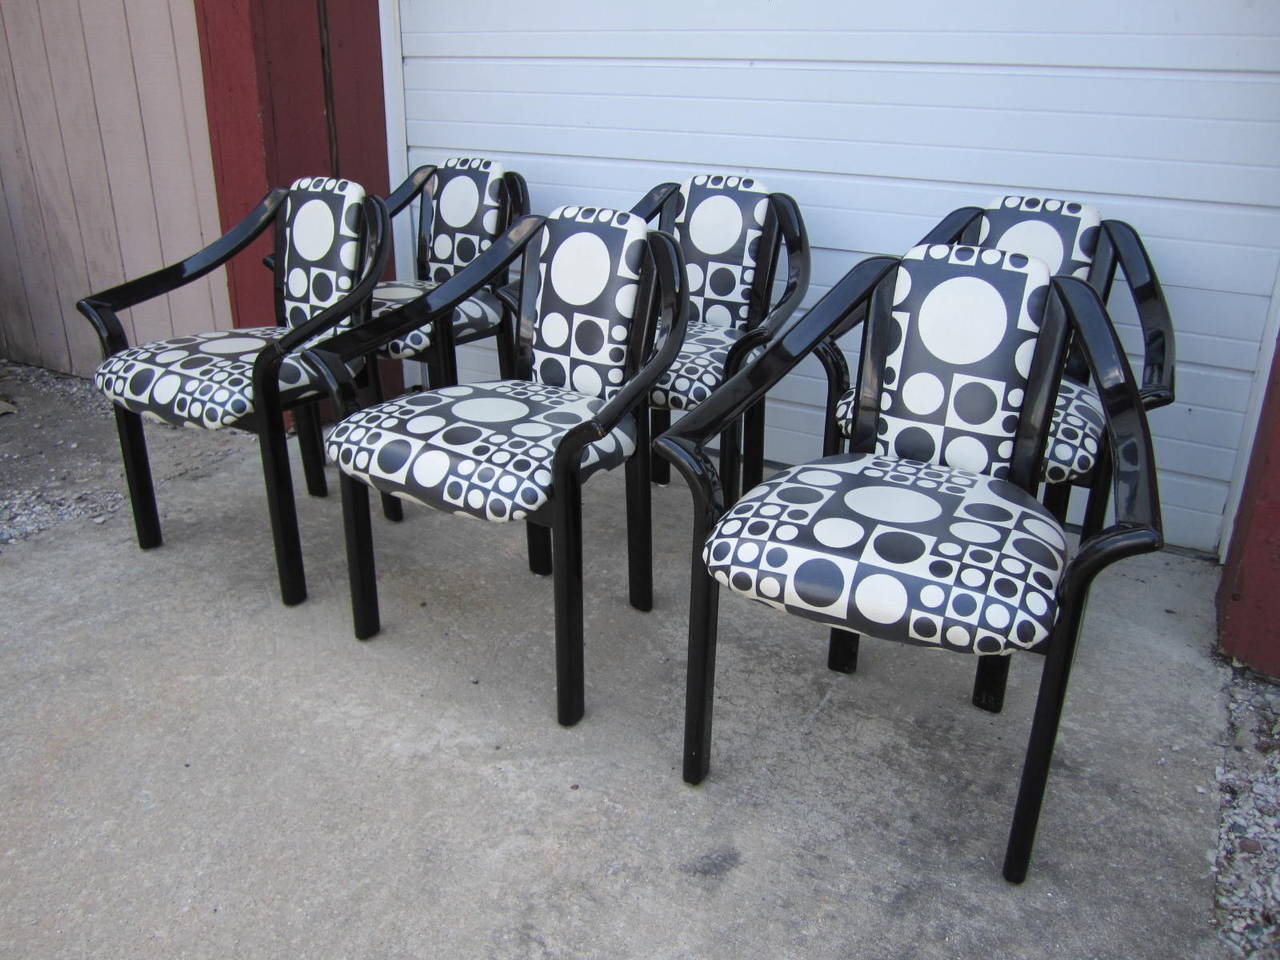 Fantastic fun set of six Panton style black lacquer dining chairs. The upholstery is in gorgeous condition being a vinyl covered Panton design. The black lacquered frames only show light wear and are quite usable as is. This set is extremely